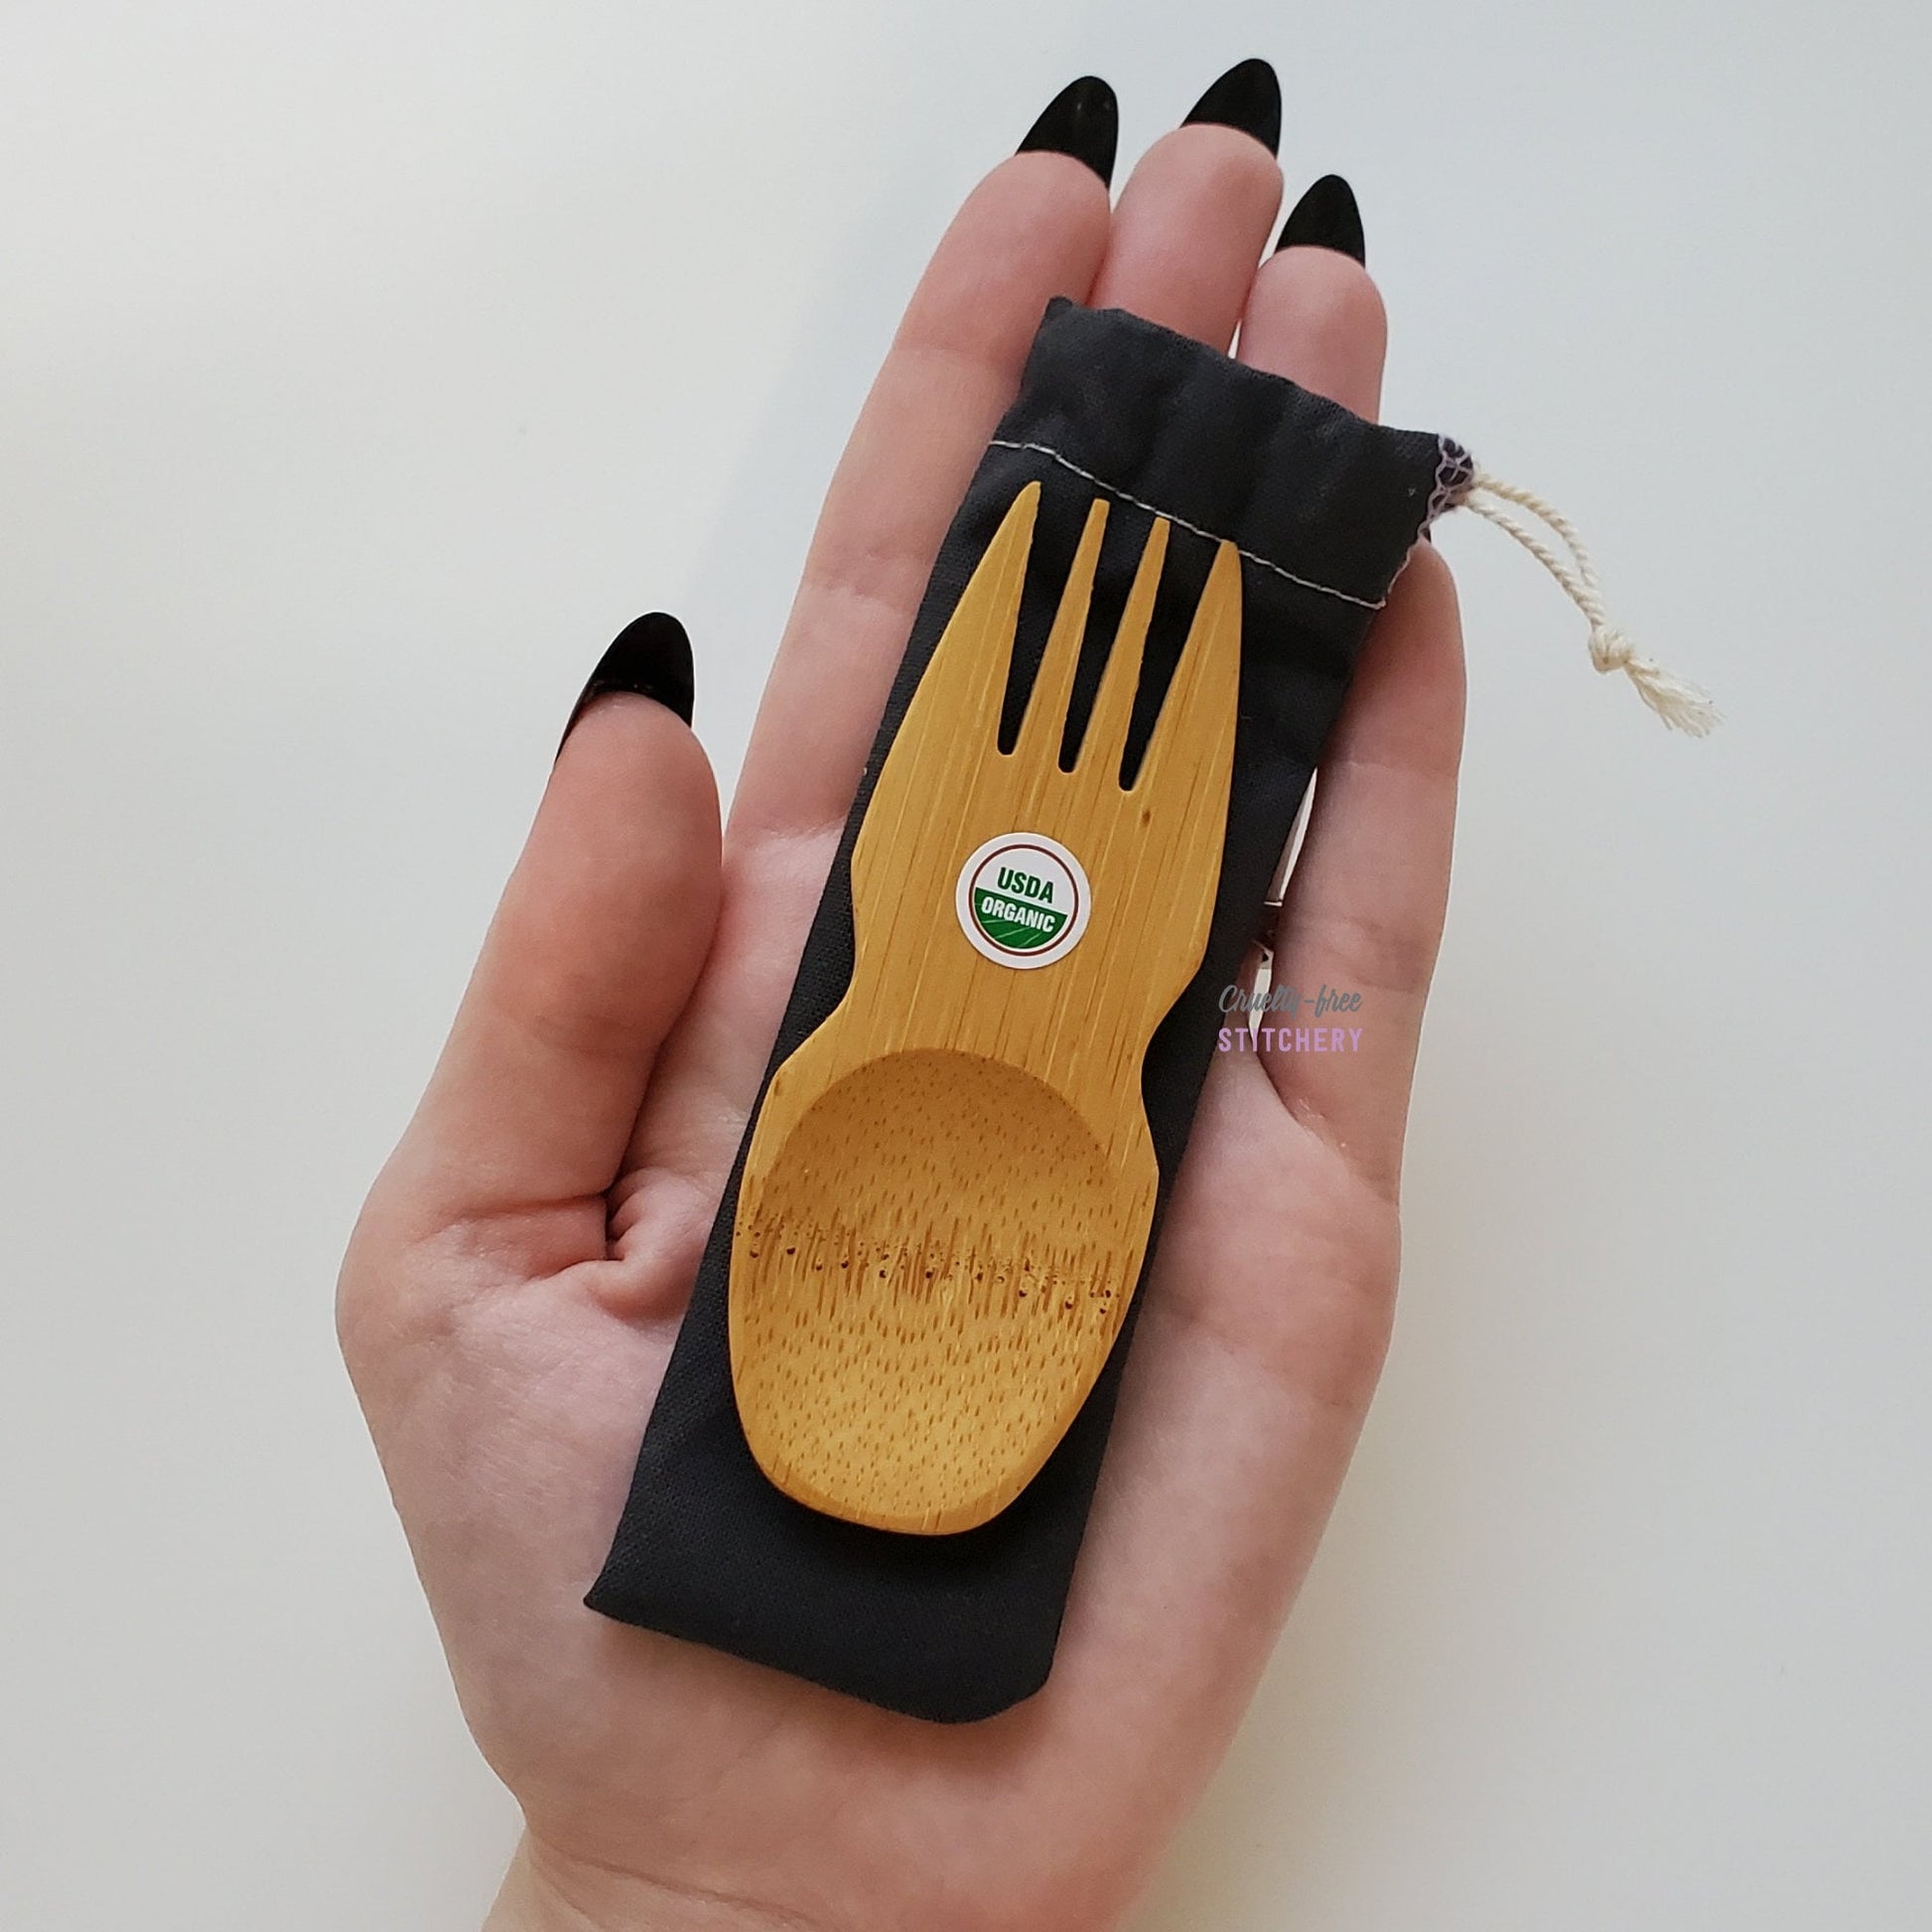 Reusable bamboo spork with pouch. Solid black fabric pouch with bamboo spork on top, laid on a hand for size reference. The spork is slightly longer than the fingers.